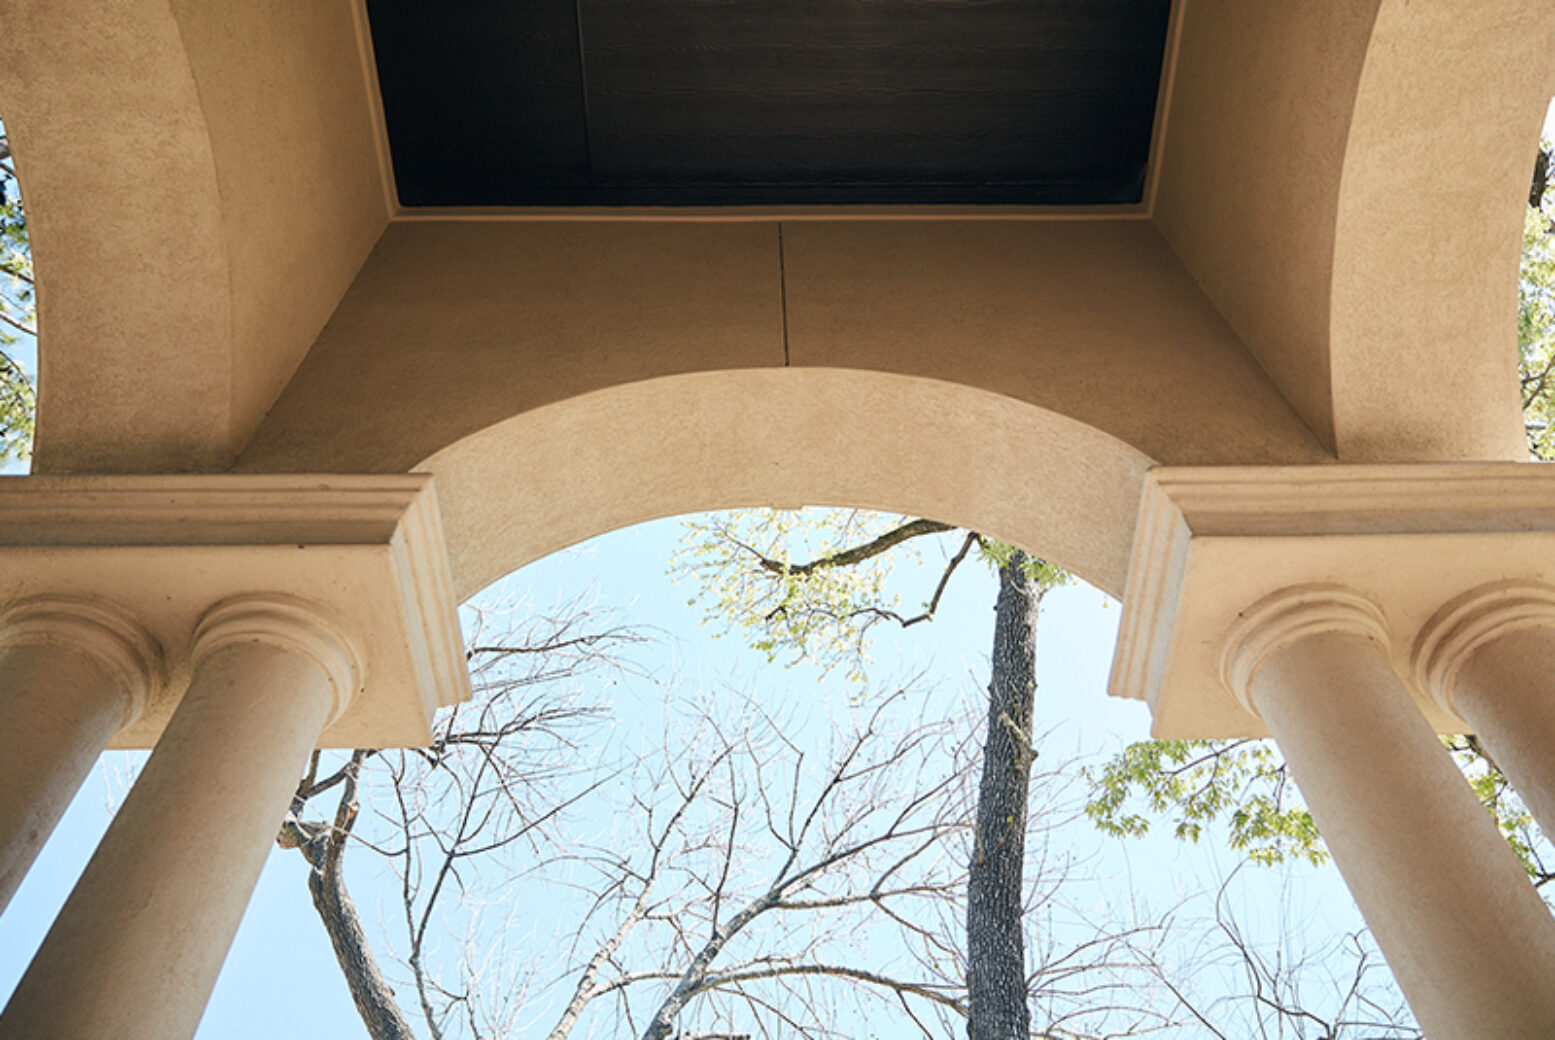 One of the entryways to the Dillard's home.